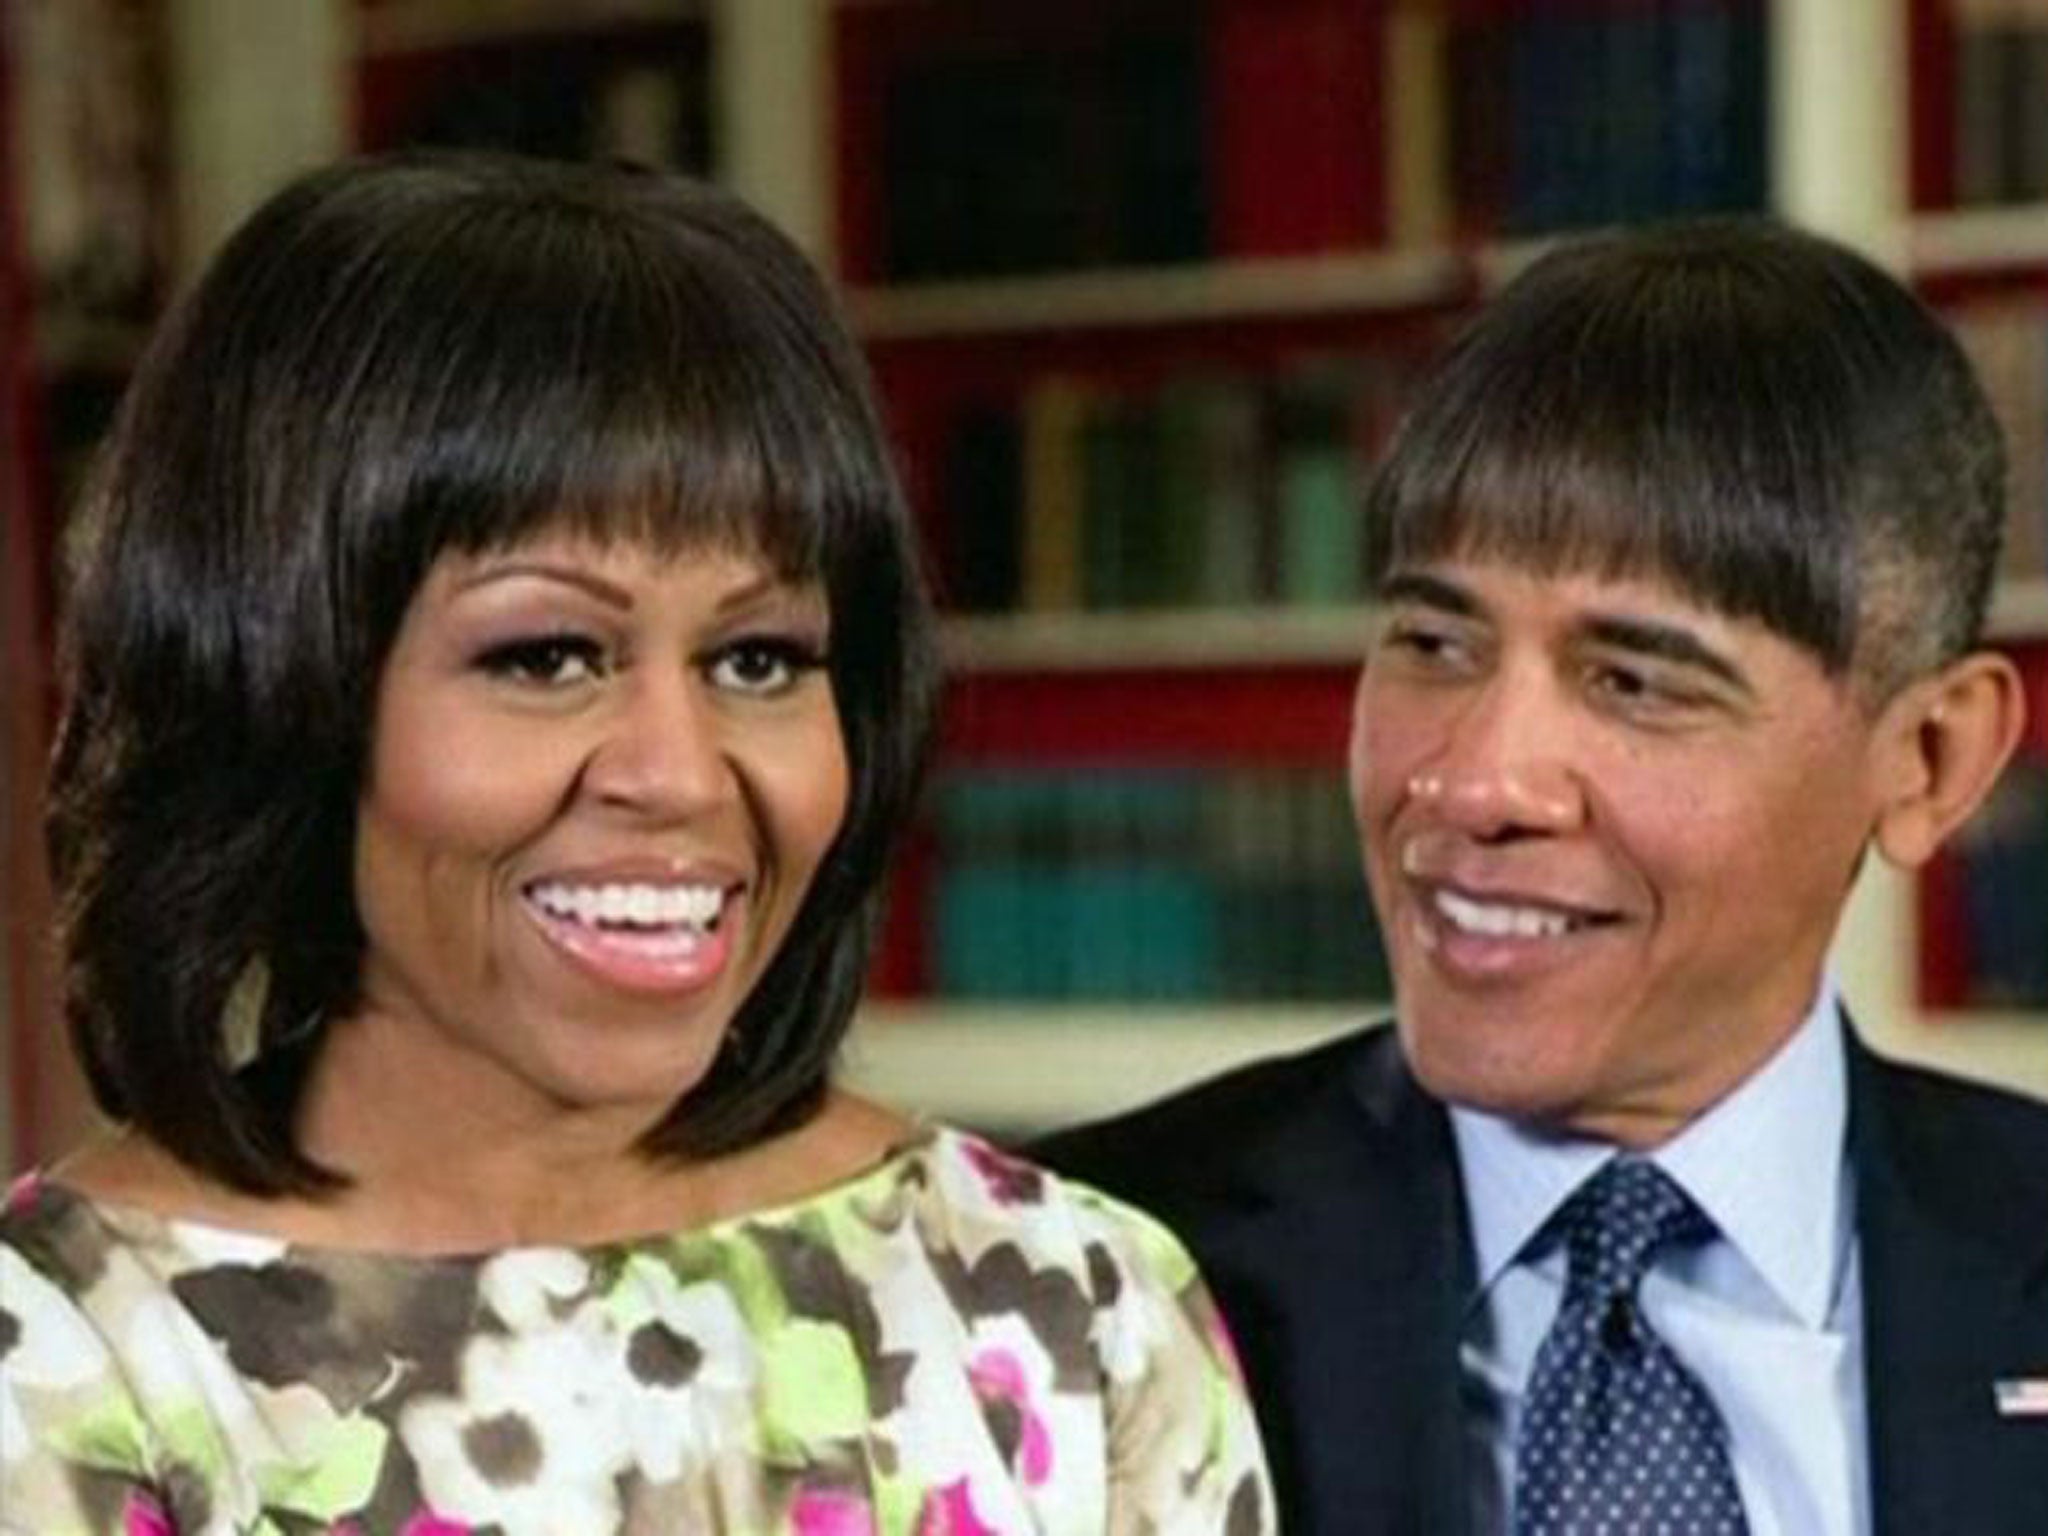 U.S. President Barack Obama makes light of his wife Michelle Obama's new bangs with a mock pictures of himself with the same hairdo in this humorous photo created by the White House shown at the annual White House Correspondents' Association dinner in Was